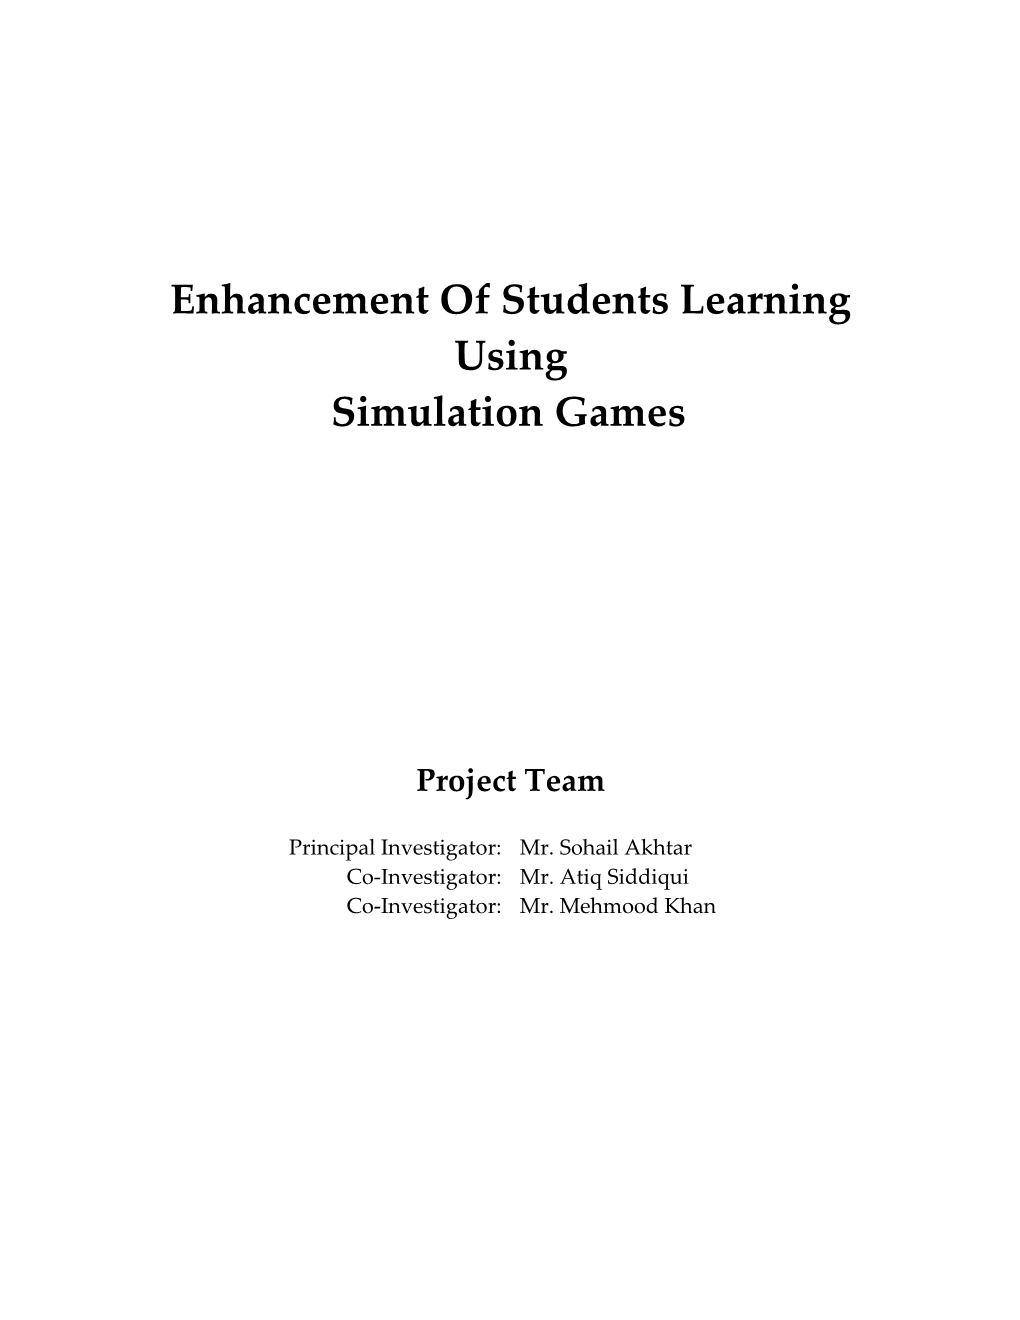 Simulation Games Are an Excellent Way to Provide Practical Decision-Making and Management